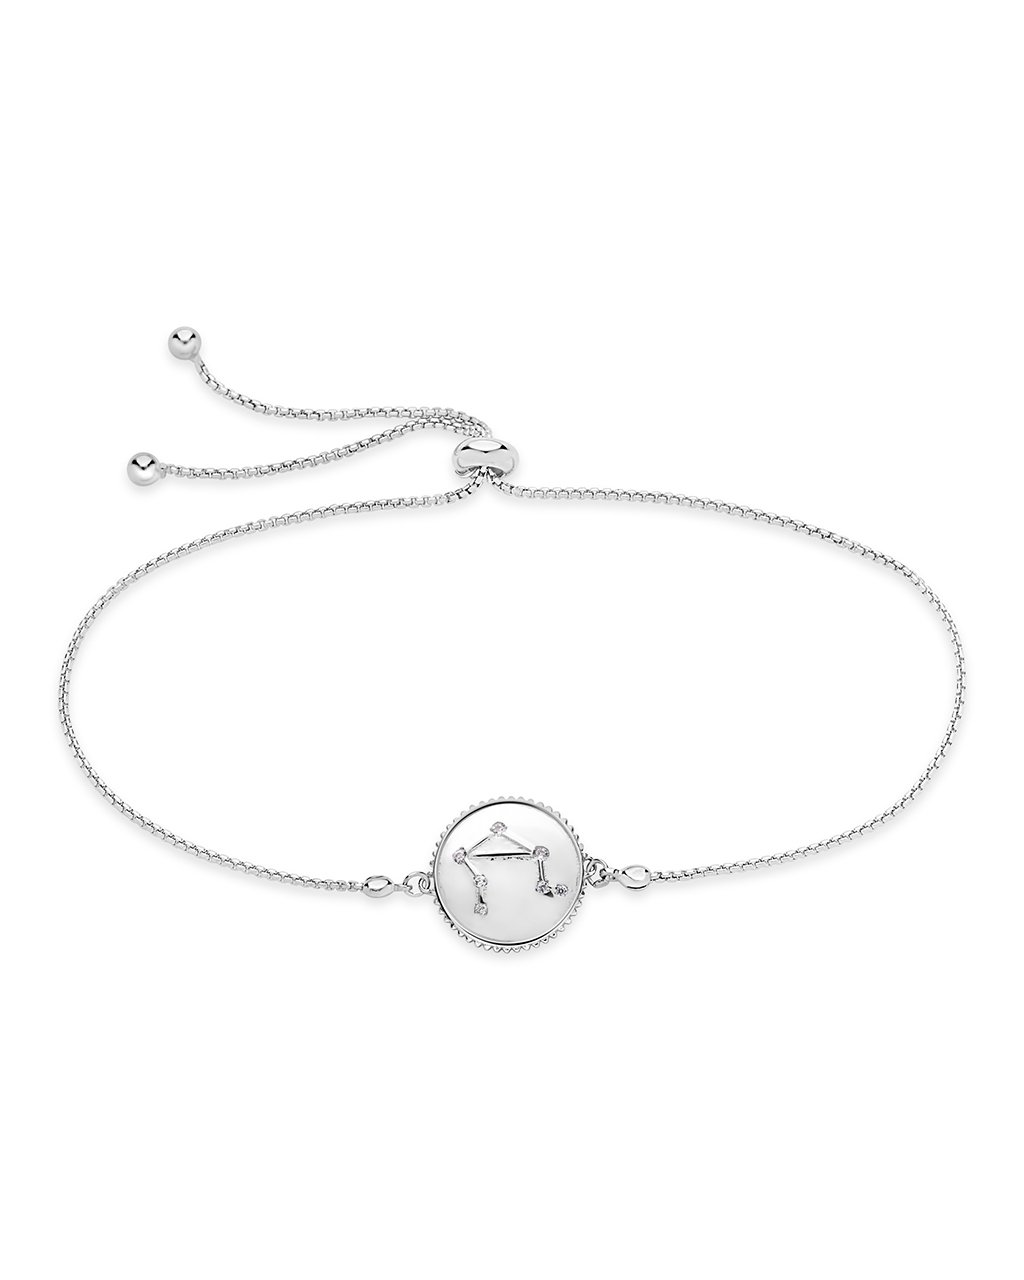 Sterling Silver Constellation Disk Bolo Bracelet Bracelet Sterling Forever Silver Libra (Sept 23 - Oct 22) 